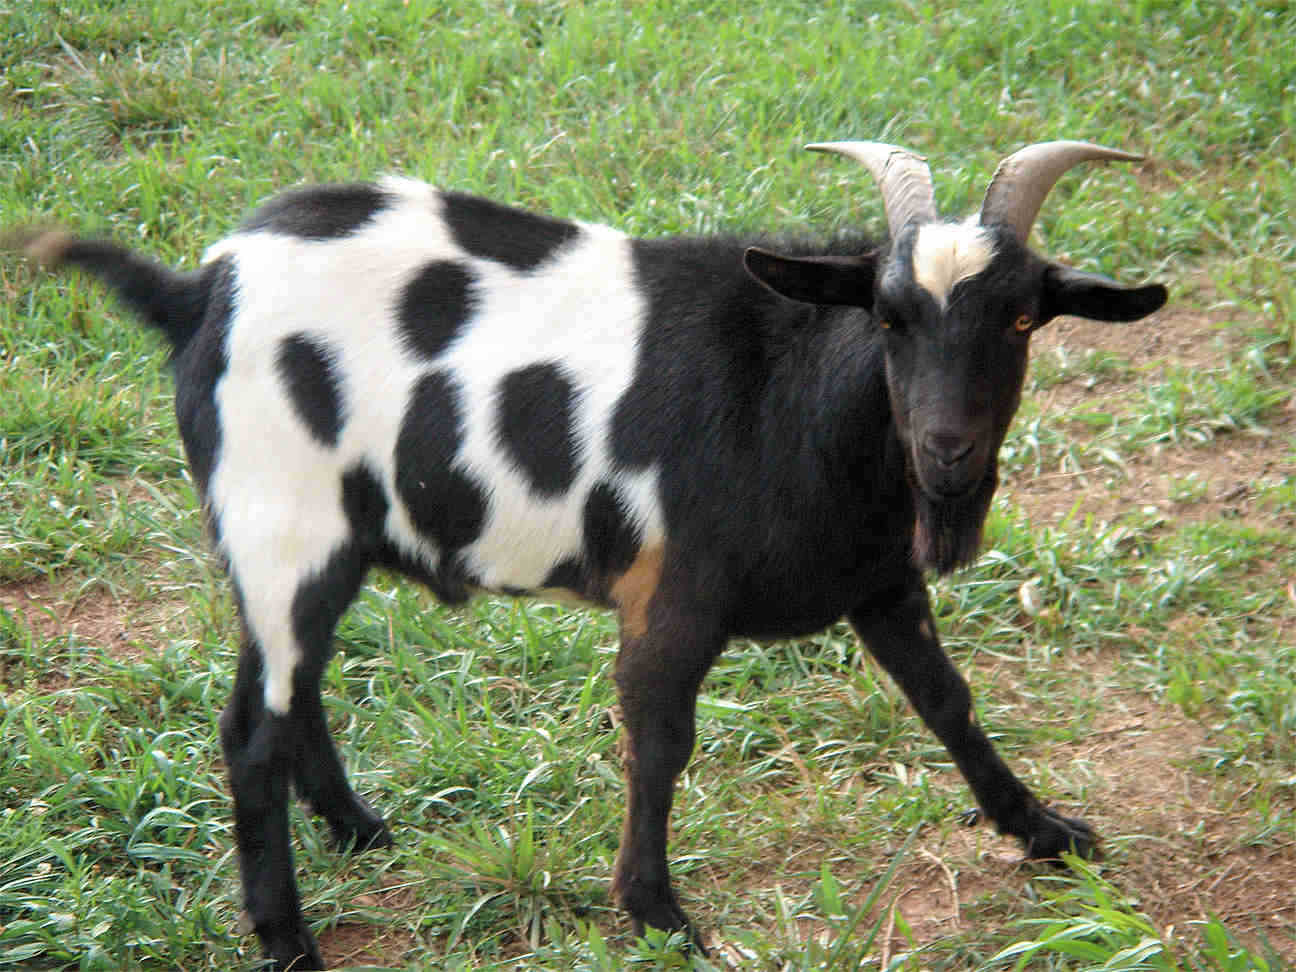 Man Rapes Goat to Death in Church